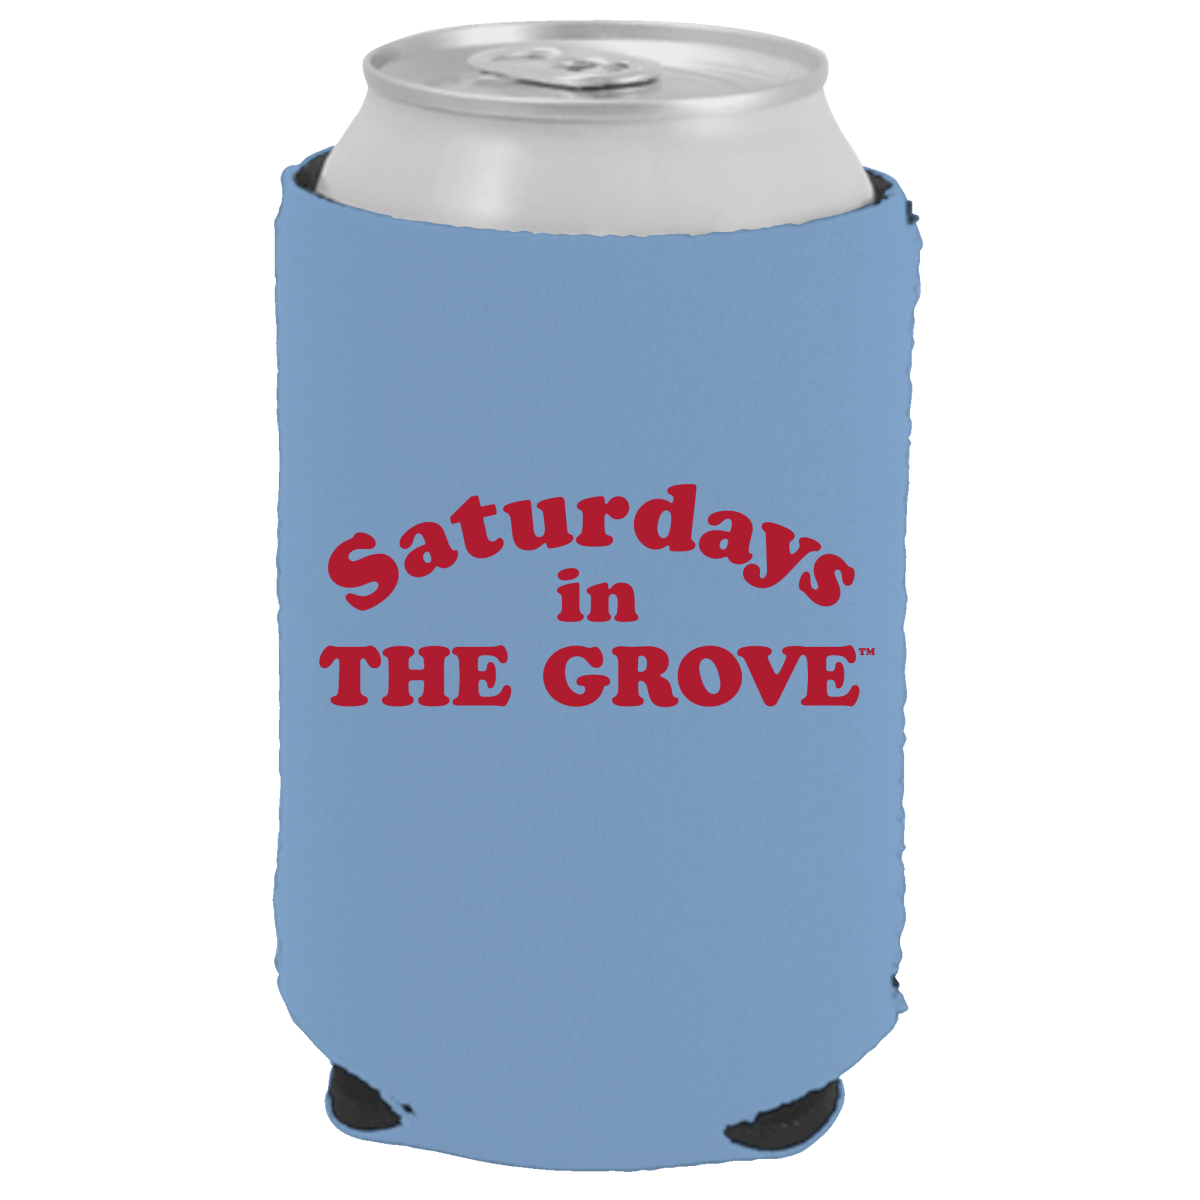 Ole Miss Saturdays Can Cooler - Shop B-Unlimited